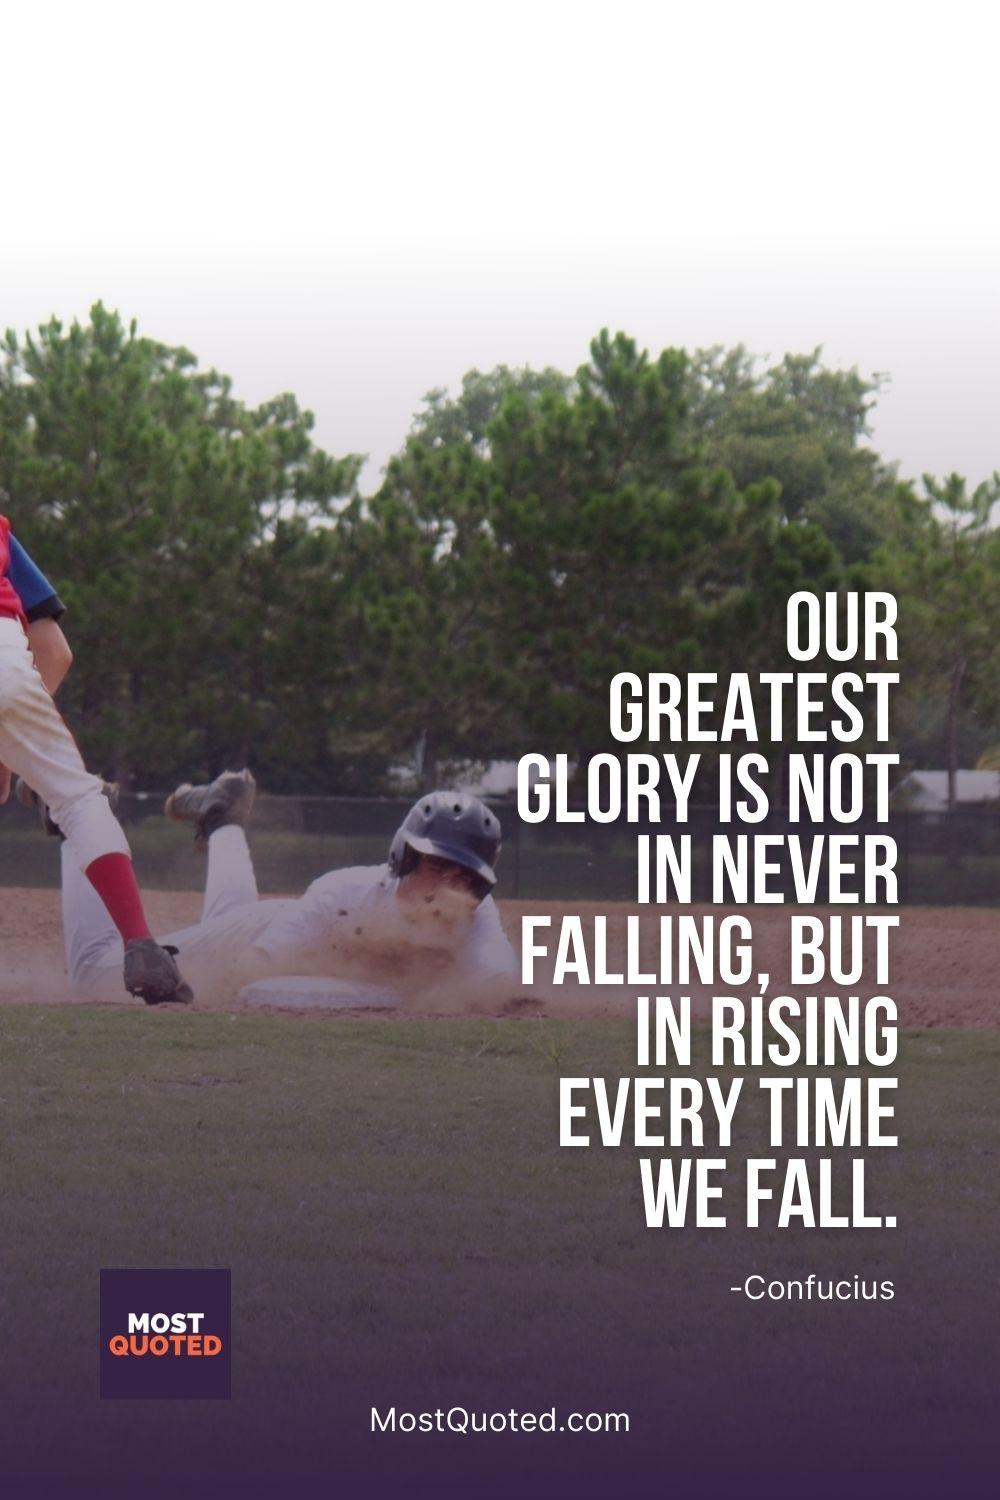 Our greatest glory is not in never falling, but in rising every time we fall. - Confucius